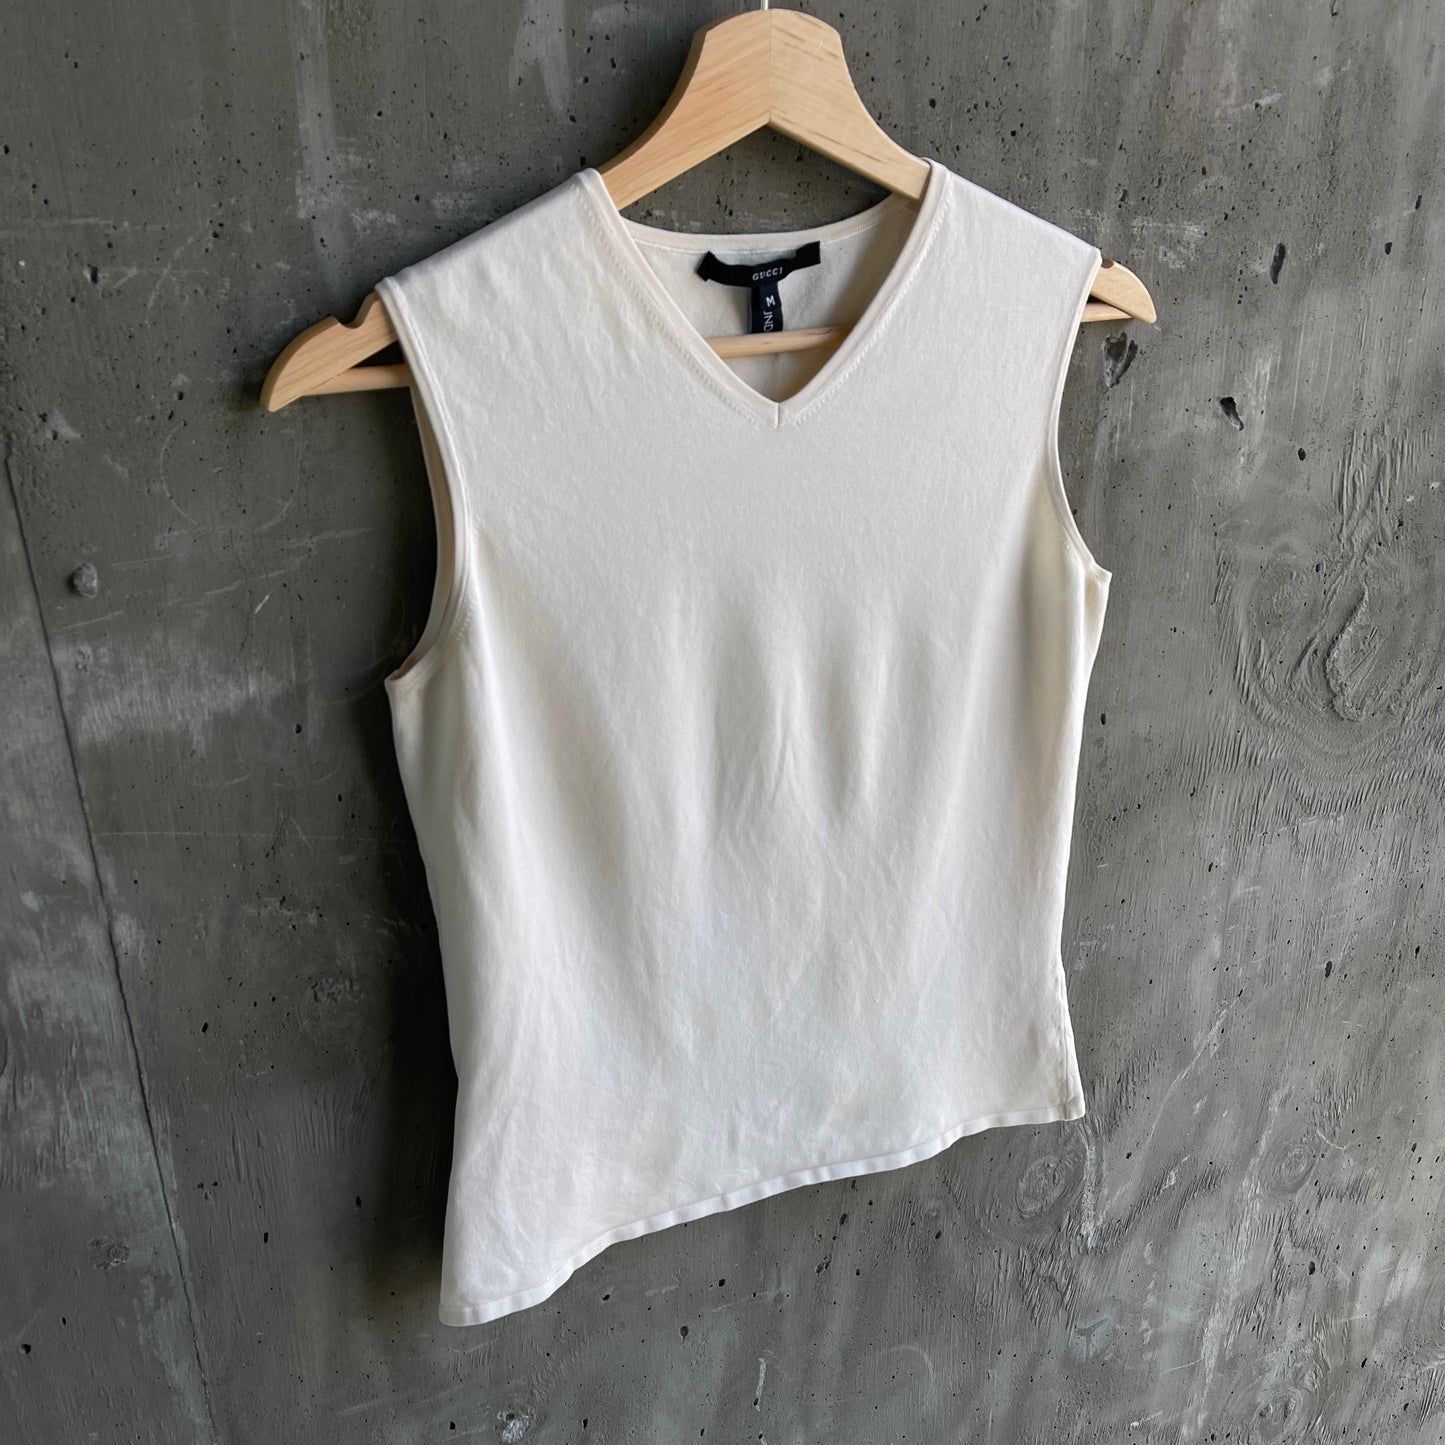 Vintage 90’s Gucci Sleeveless Top